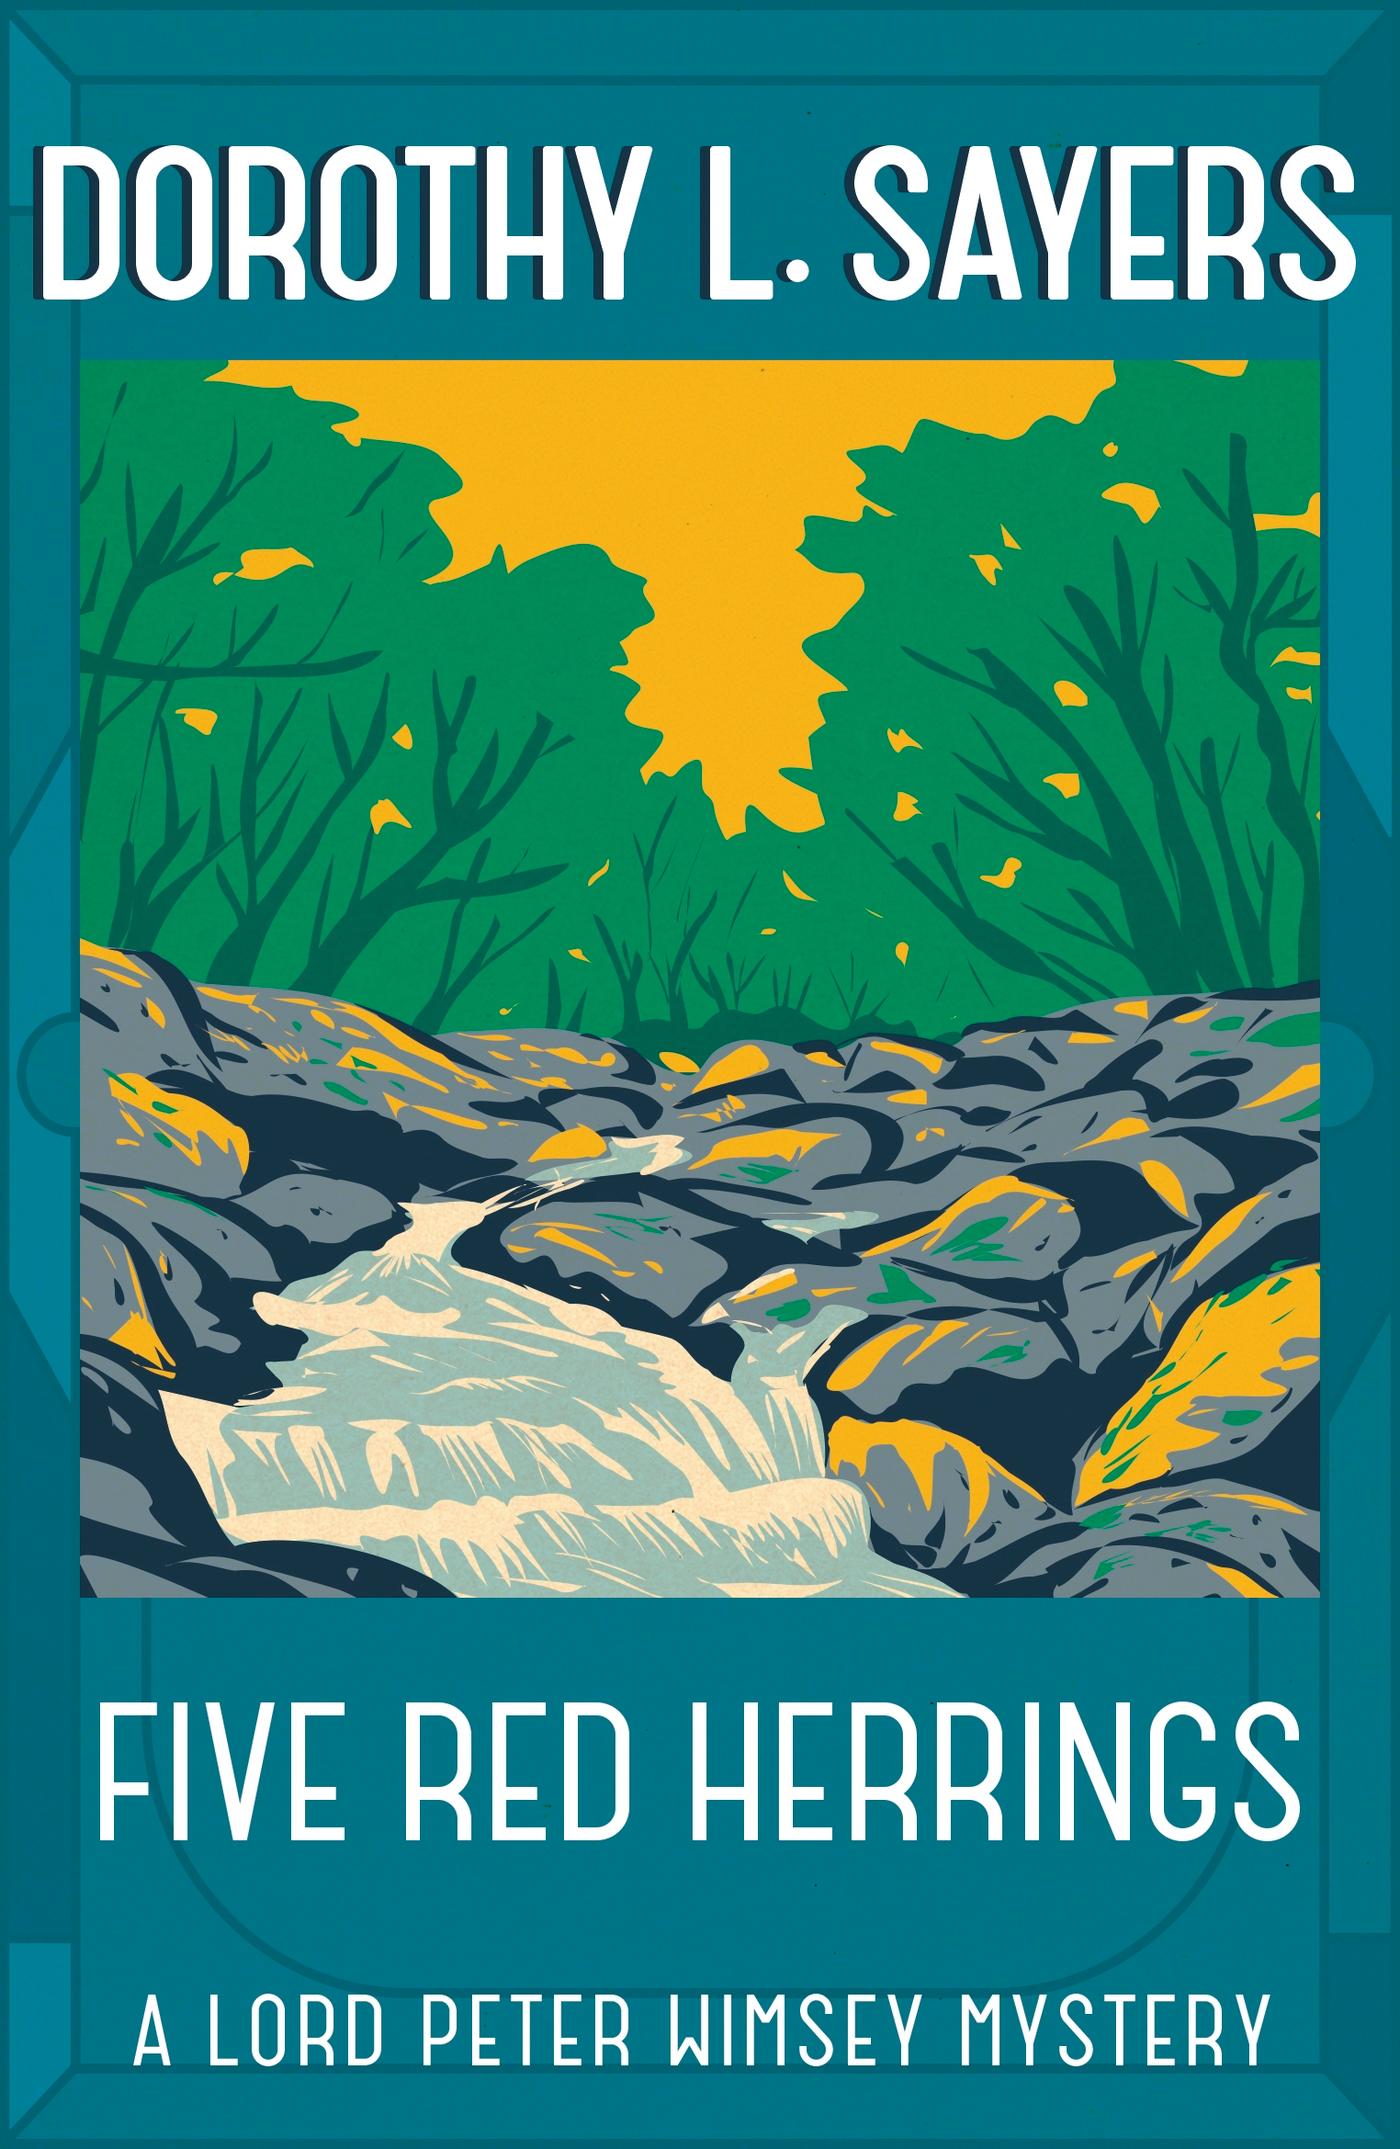 Five Red Herrings | A classic in detective fiction | Dorothy L Sayers | Taschenbuch | Lord Peter Wimsey Mysteries | 371 S. | Englisch | 2016 | Hodder & Stoughton | EAN 9781473621350 - Sayers, Dorothy L